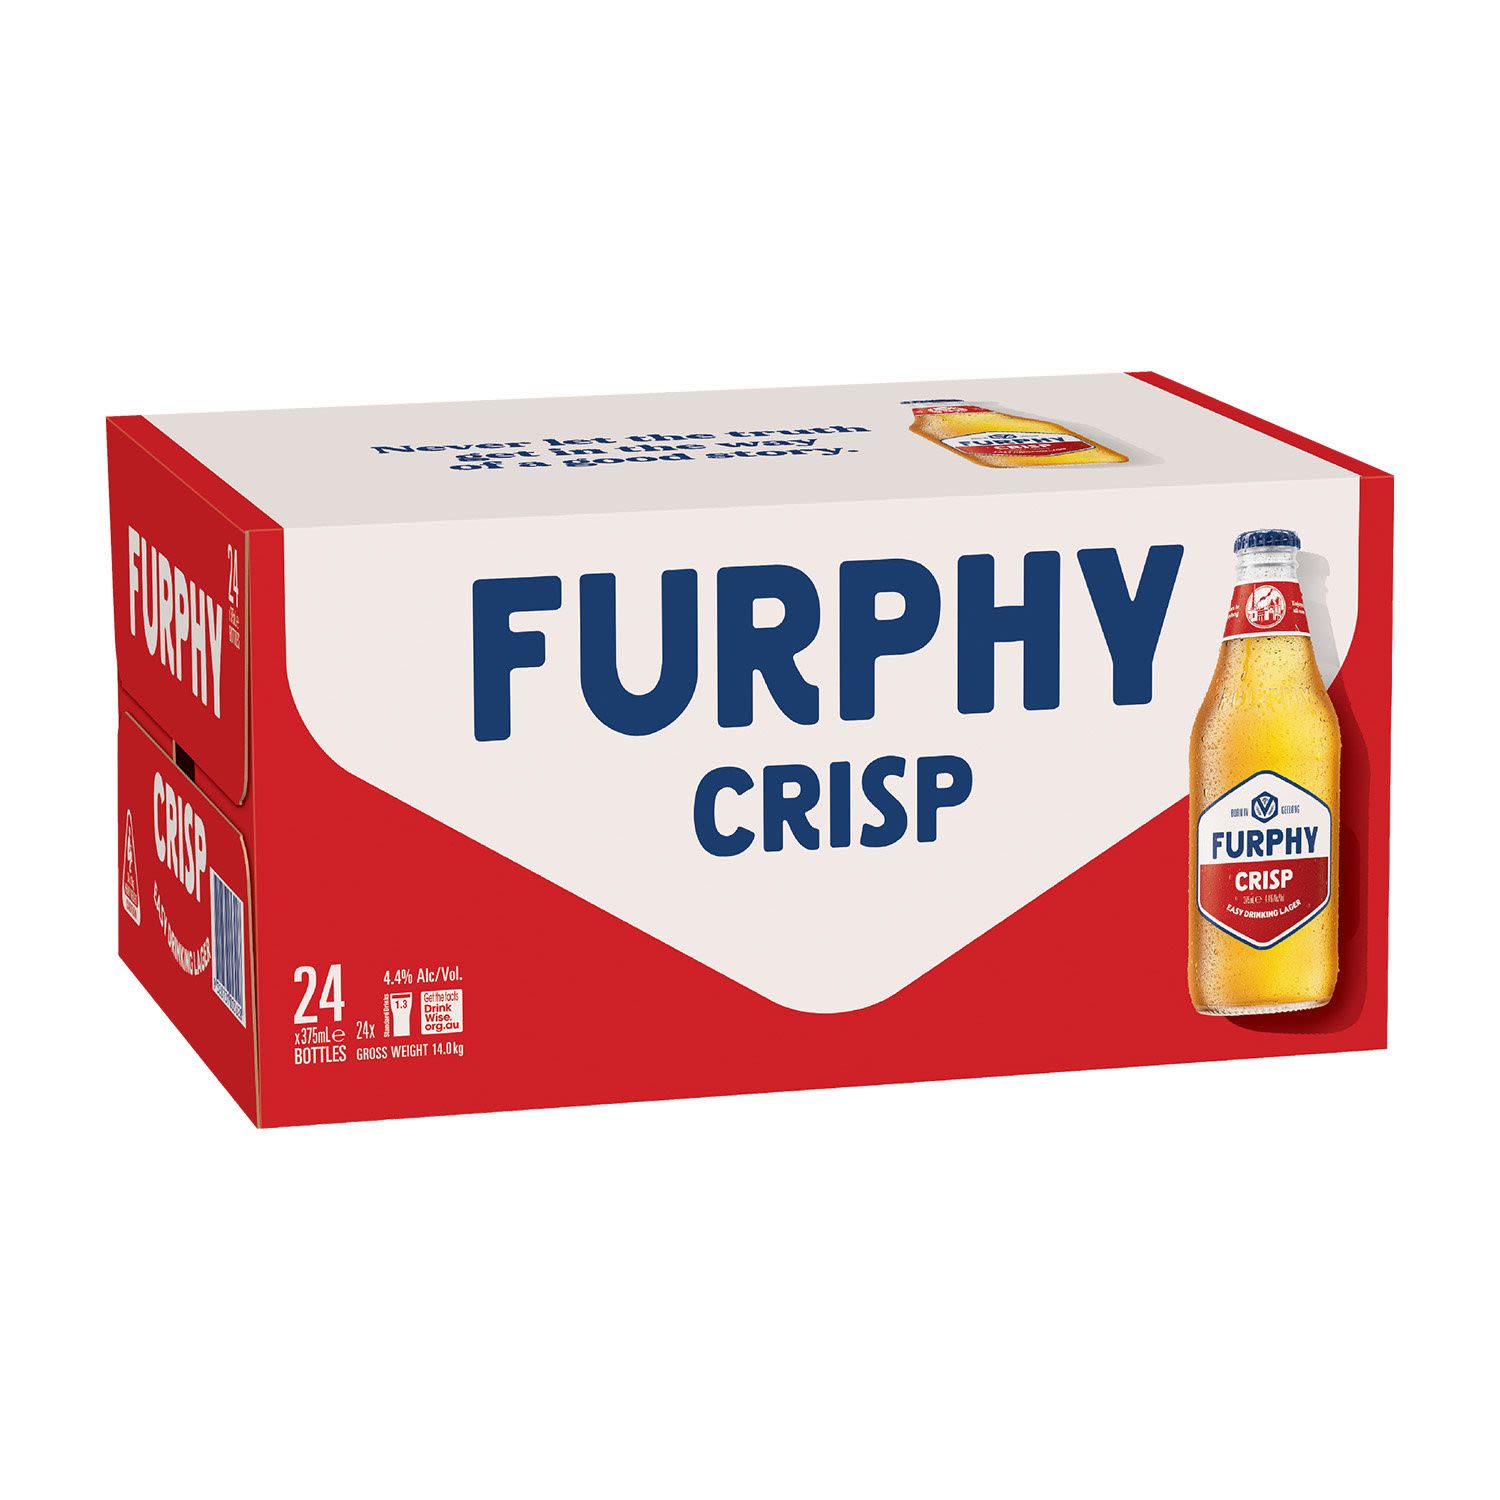 Furphy Crisp Lager is an easy drinking beer that is low in bitterness, light in colour and finishes clean.<br /> <br />Alcohol Volume: 4.50%<br /><br />Pack Format: 24 Pack<br /><br />Standard Drinks: 1.3</br /><br />Pack Type: Bottle<br /><br />Country of Origin: Australia<br />